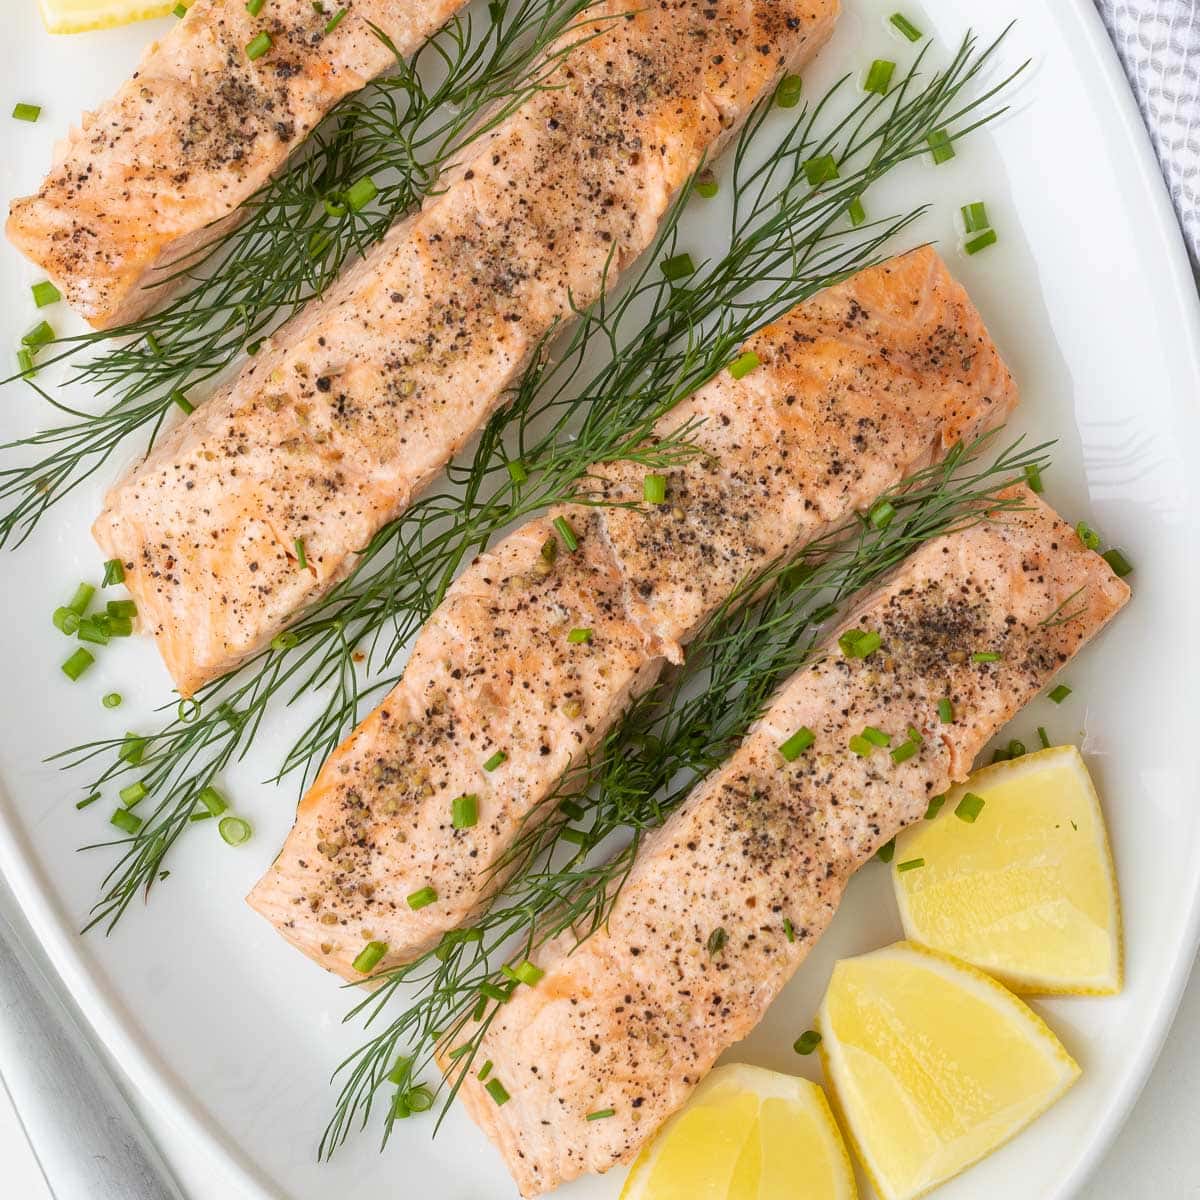 Close up of a platter of salmon filets with lemon and herbs on a table.